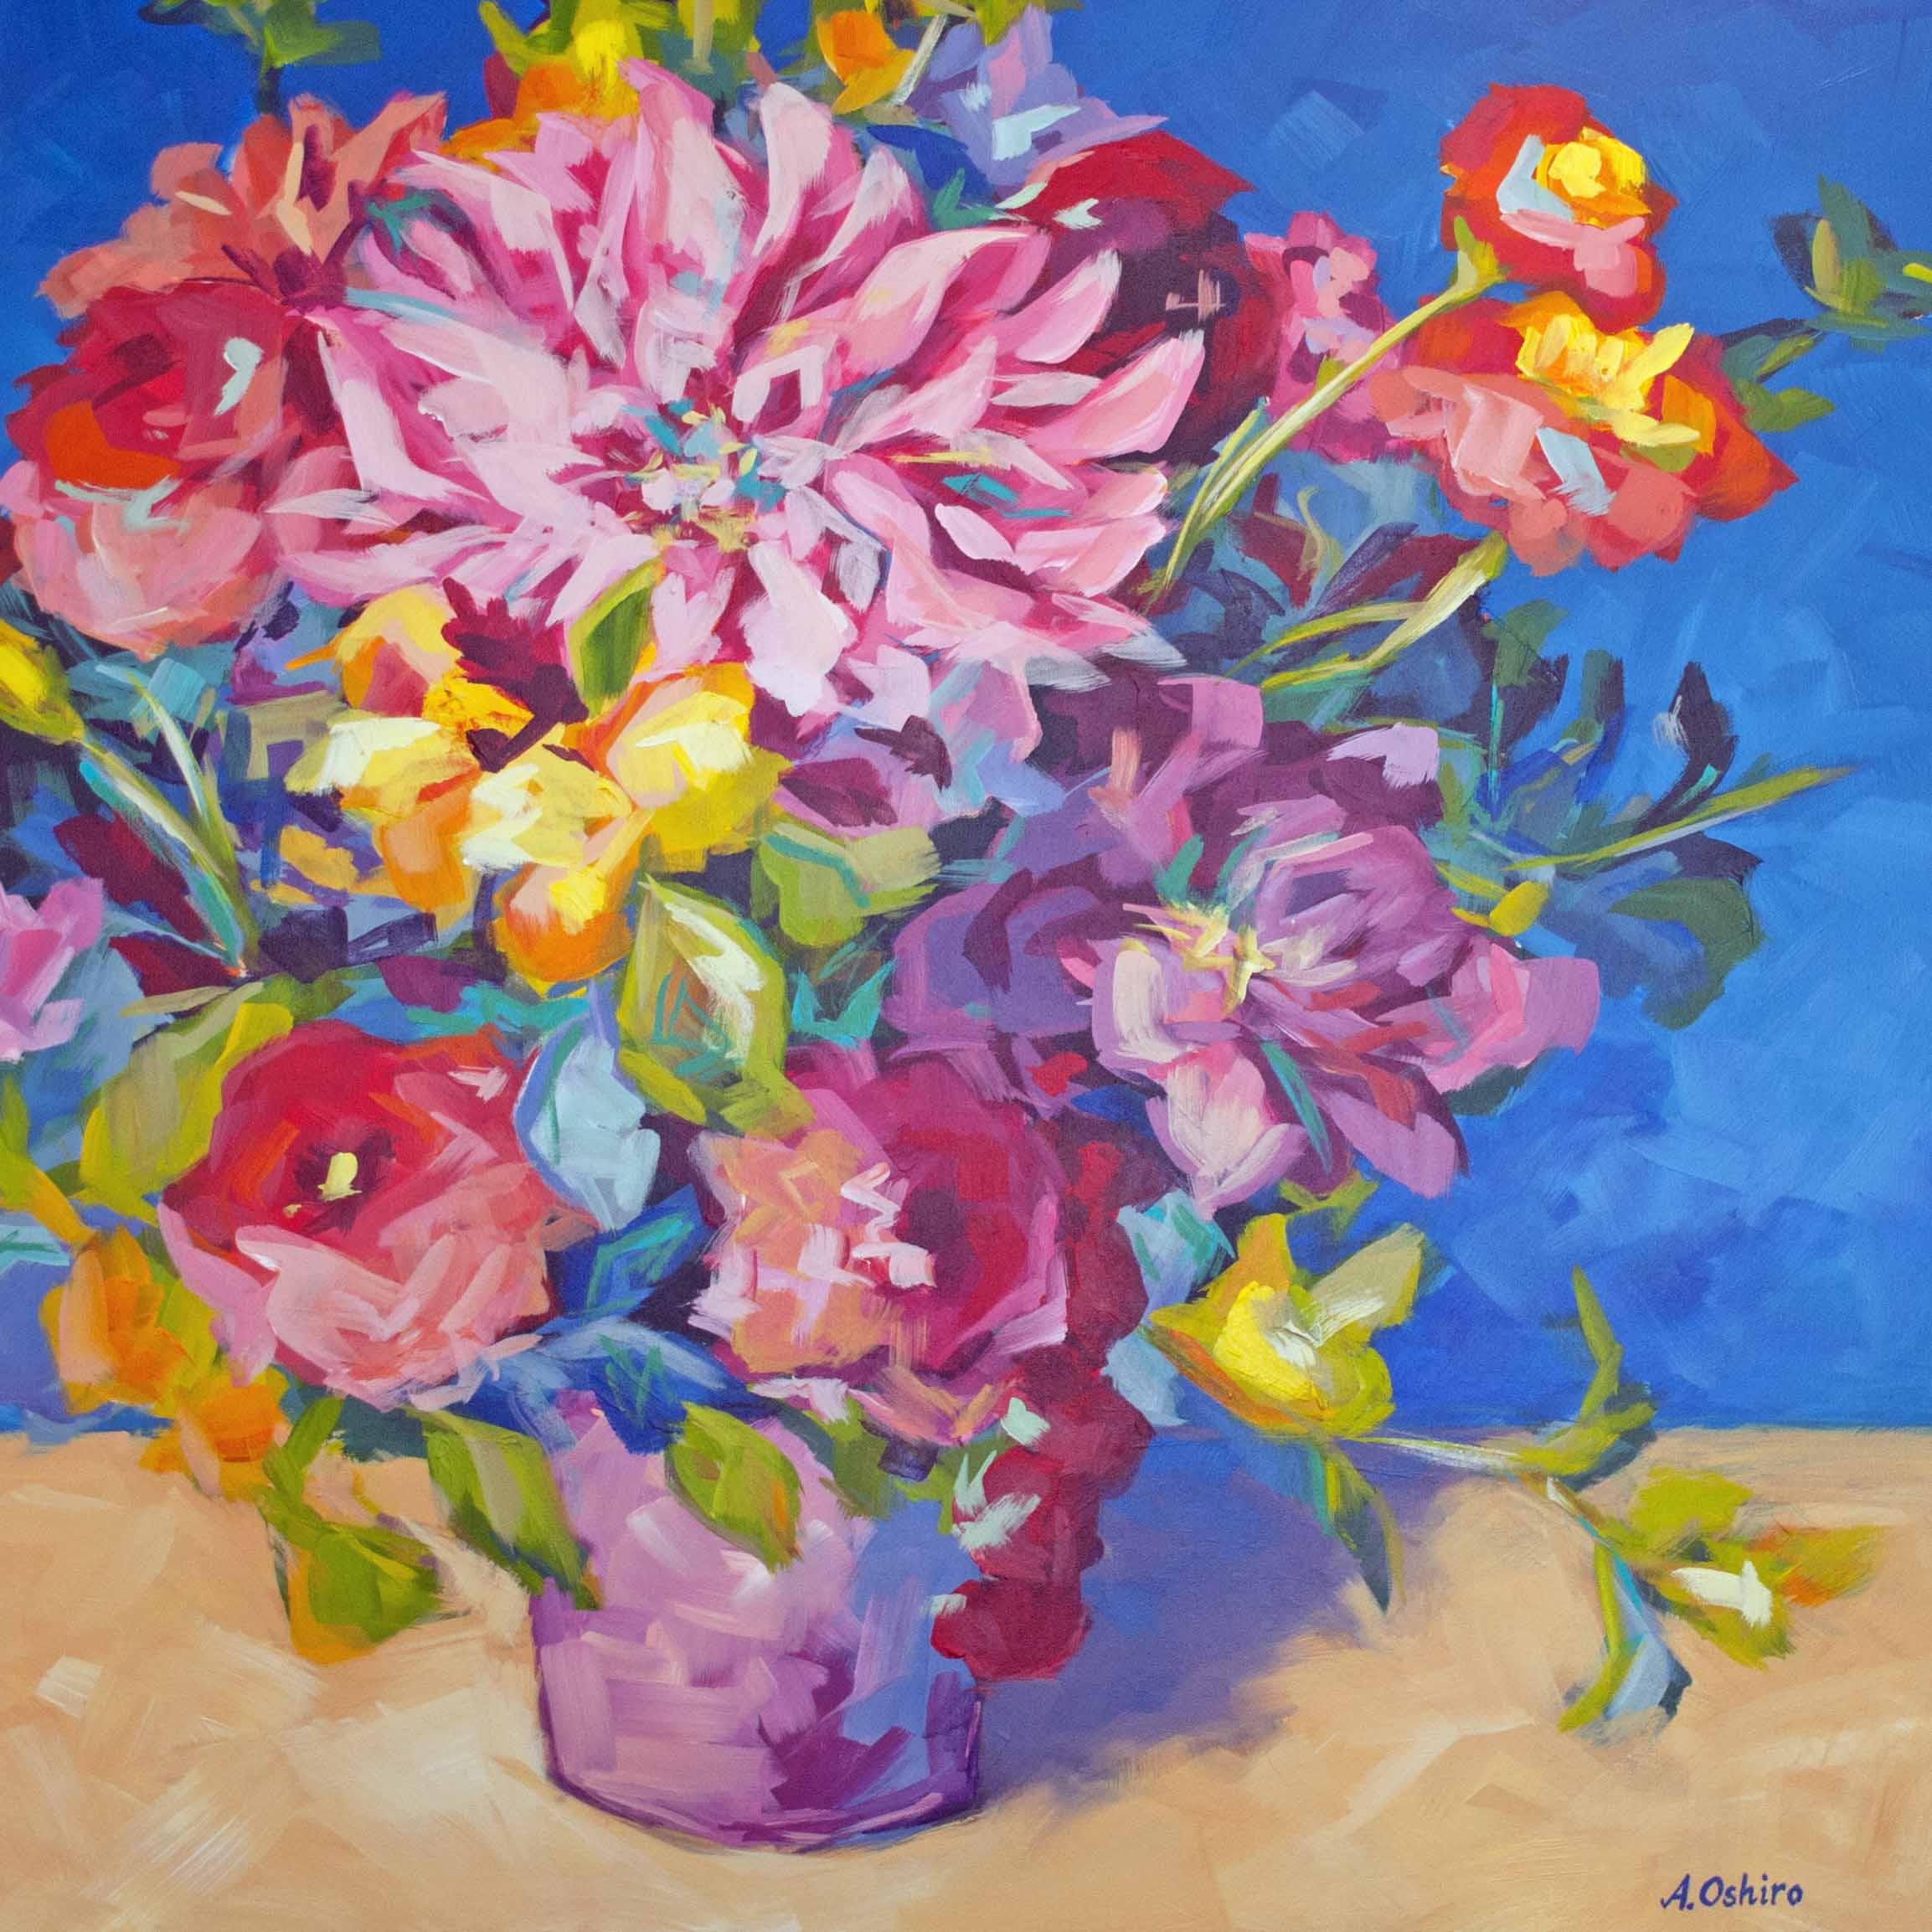 "Merry'', Acrylic Painting of Vase of colourful fresh flowers with blue background, by Ashley Oshiro, Calgary, Alberta, Local Fine Artist, Original Art